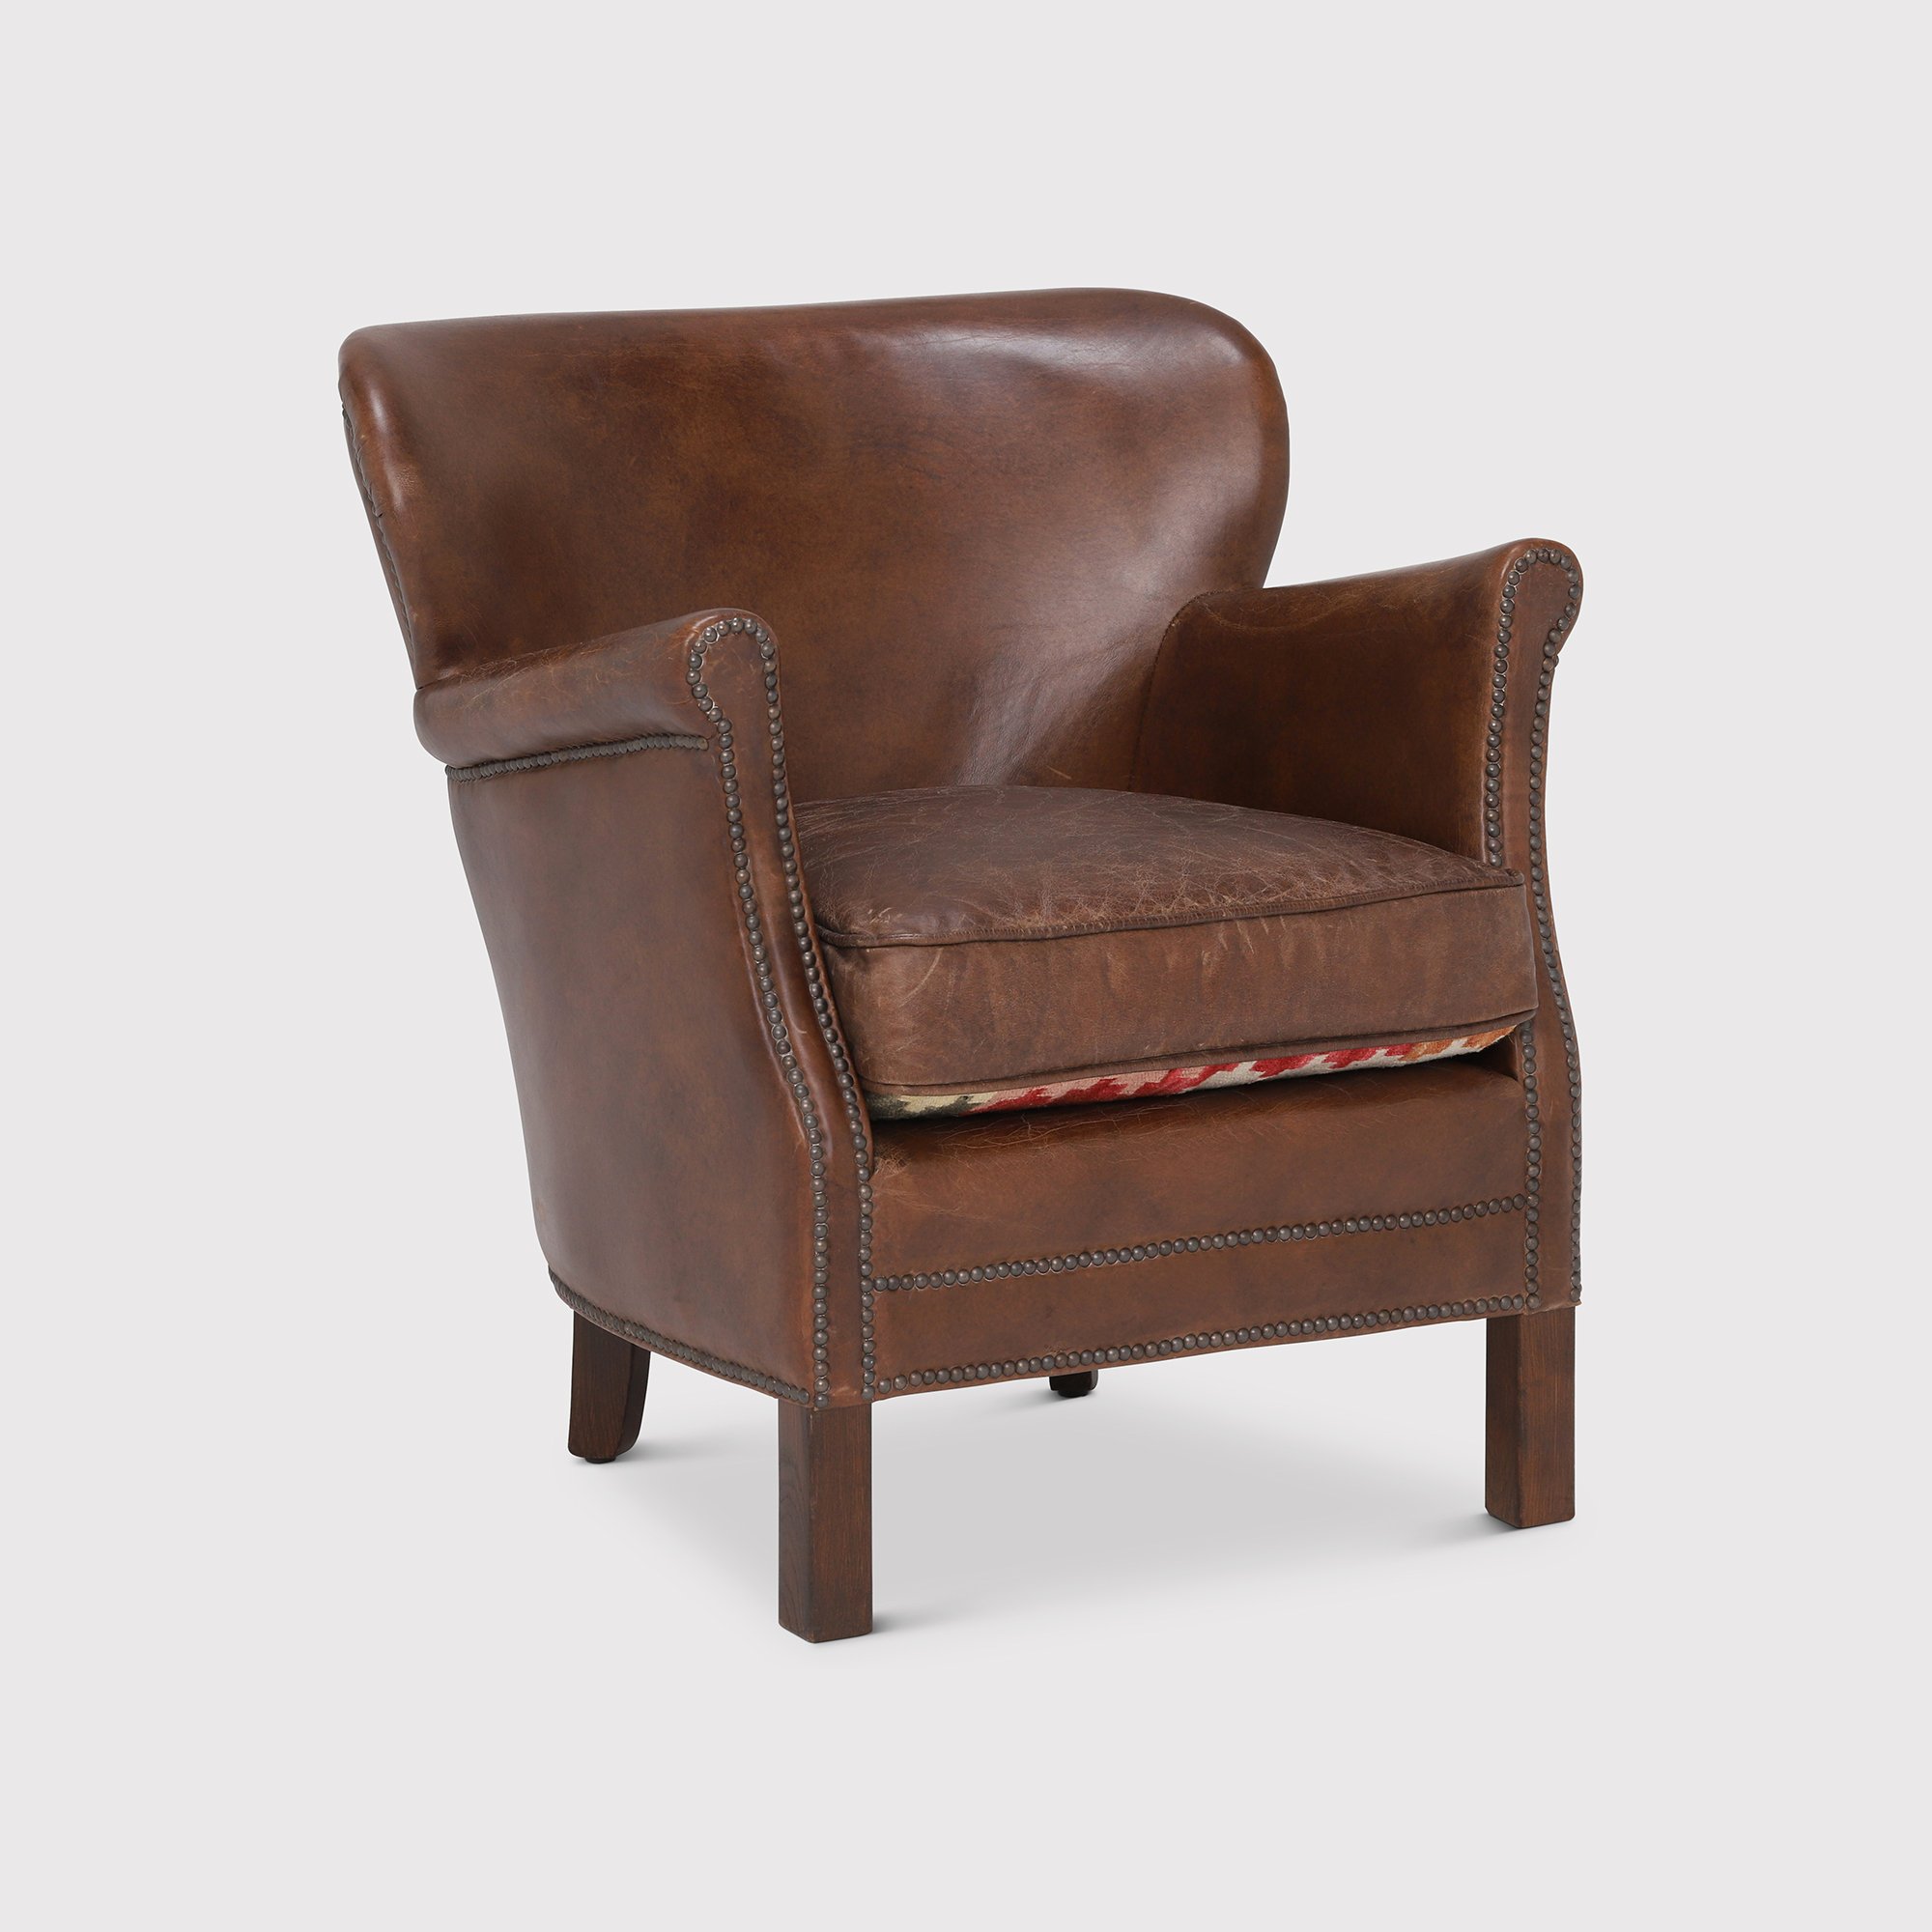 Cavendish Armchair, Brown Leather | Barker & Stonehouse